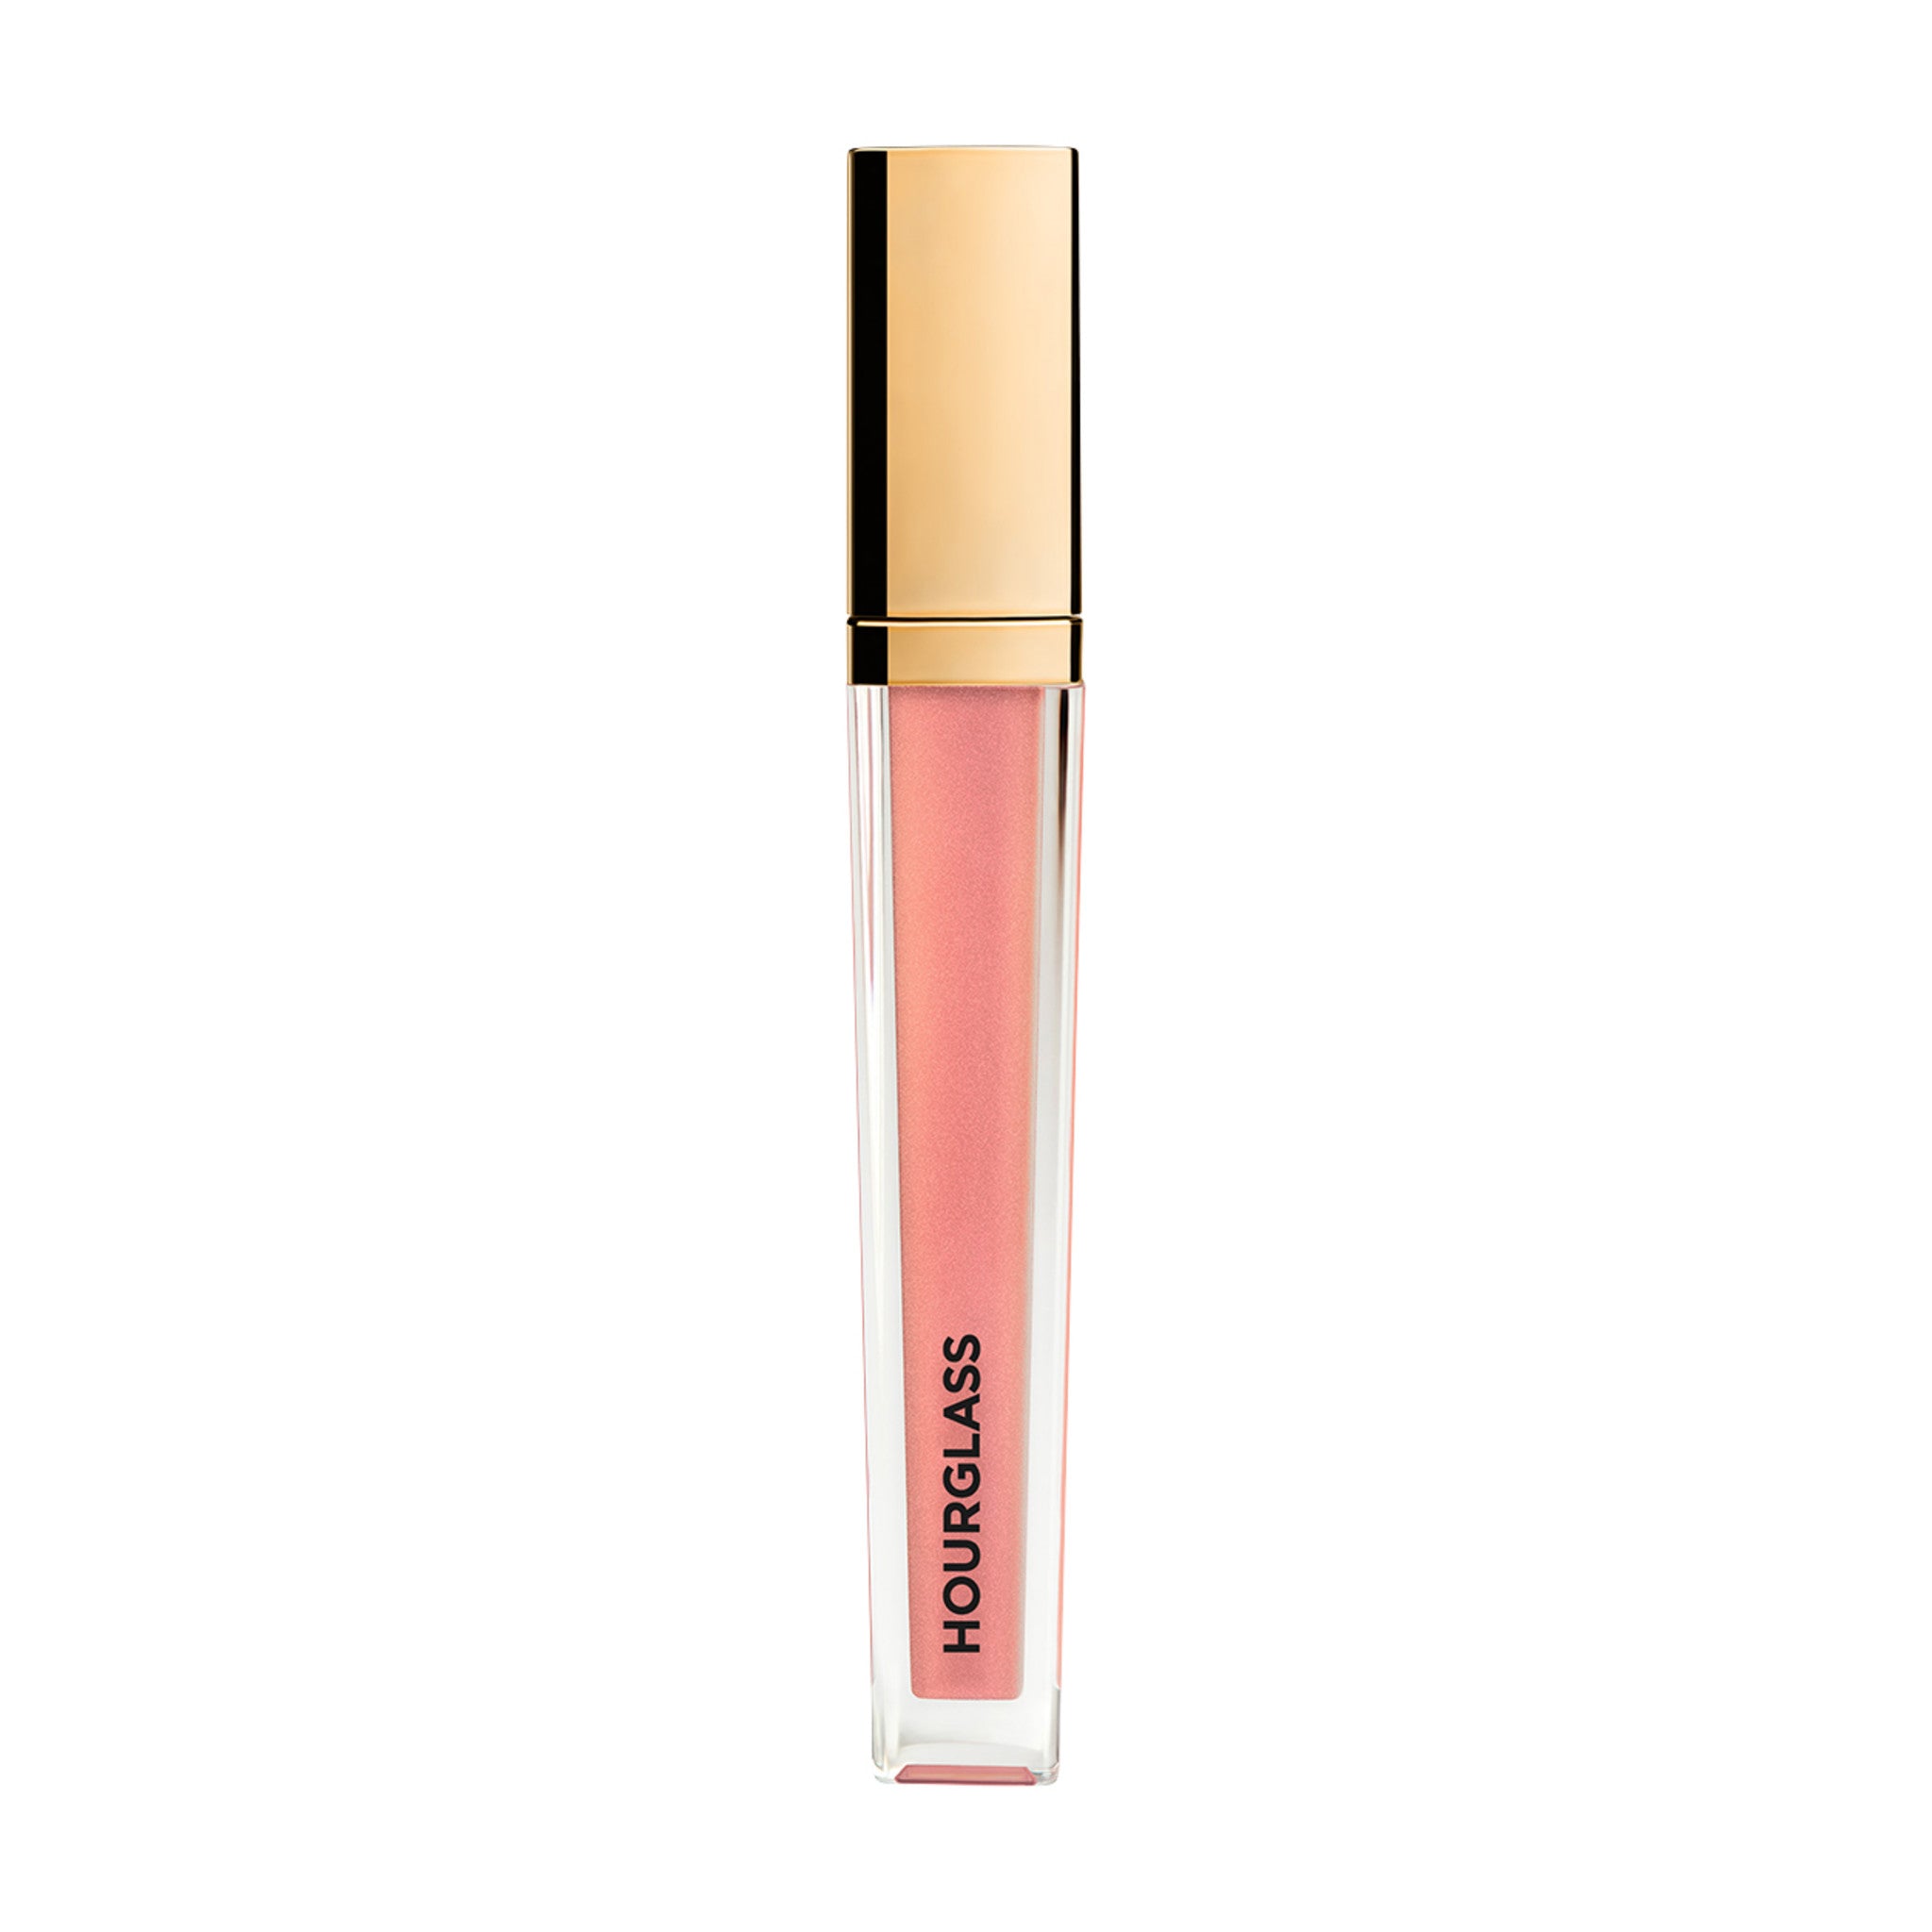 Hourglass Unreal High Shine Volumizing Lip Gloss Color/Shade variant: Fortune main image. This product is in the color pink